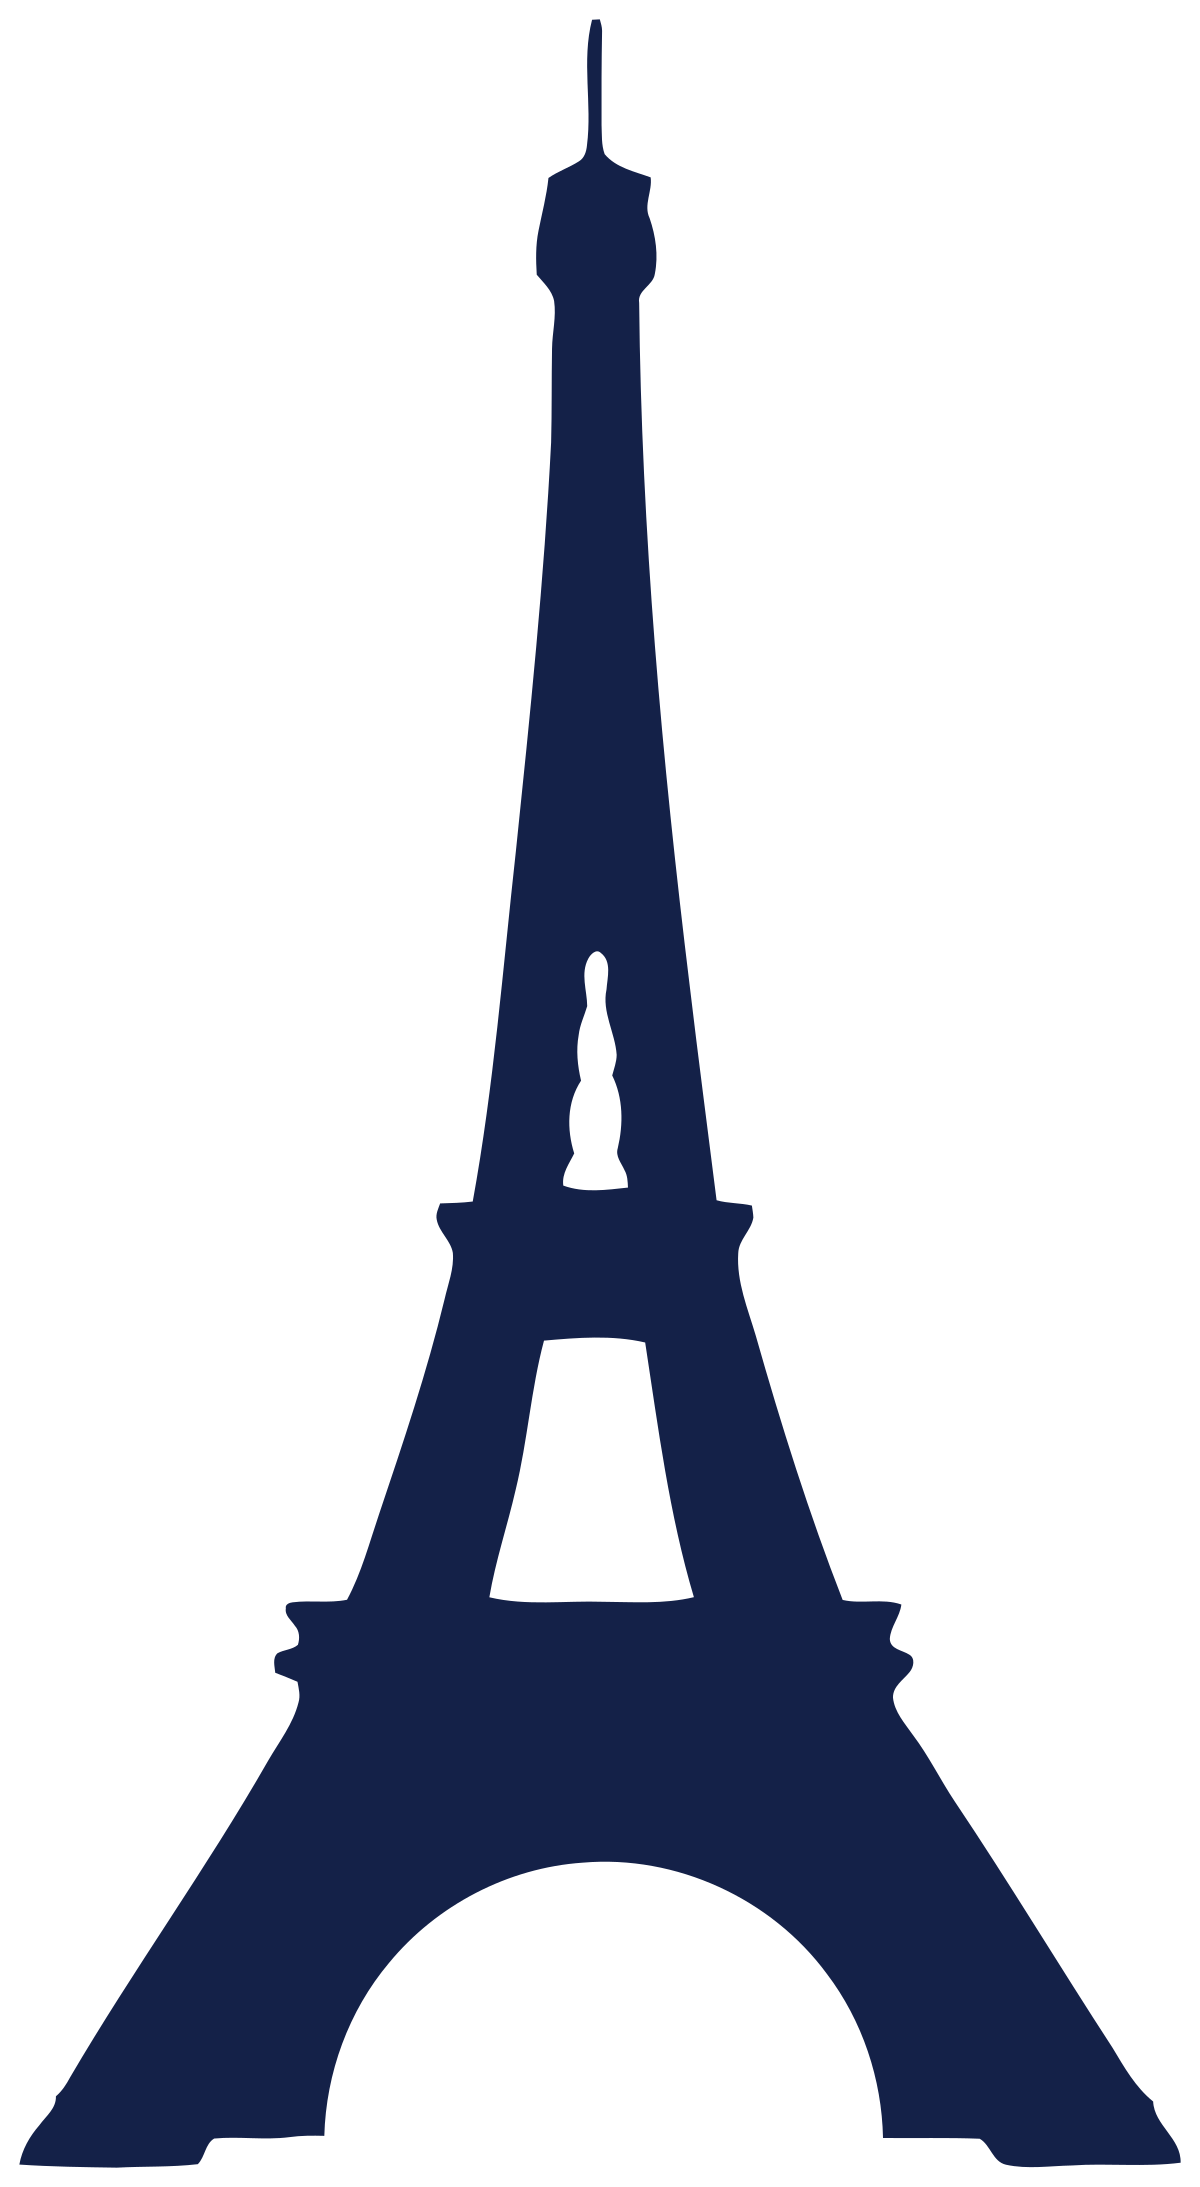 Download File:Eiffel Tower icon blue.svg - Wikimedia Commons